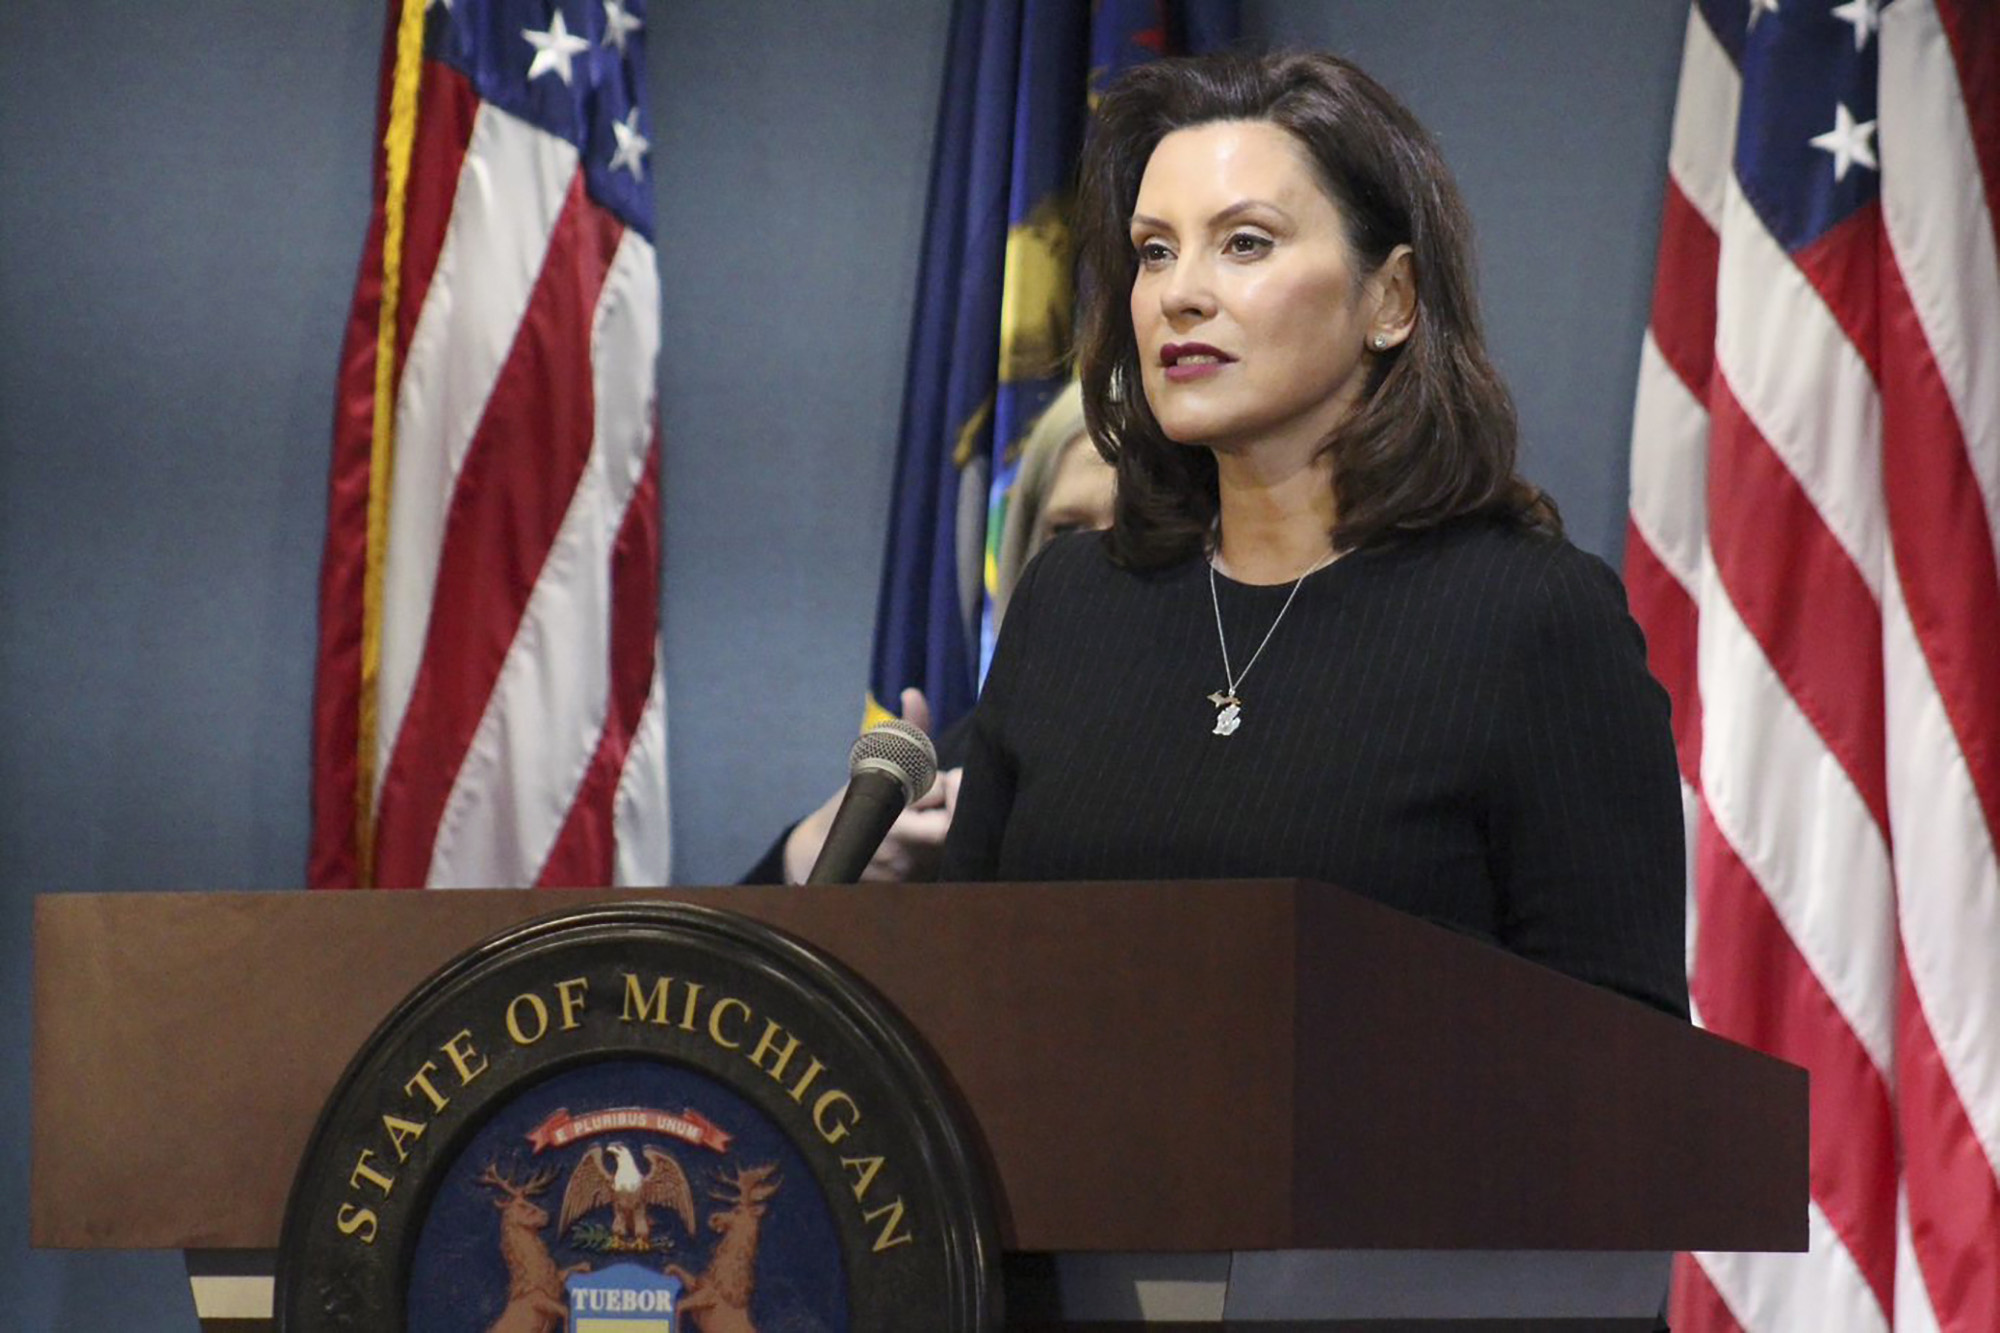 PHOTO: This photo provided by the Michigan Office of the Governor, Michigan Gov. Gretchen Whitmer addresses the state during a speech in Lansing, Mich., April 29, 2020.